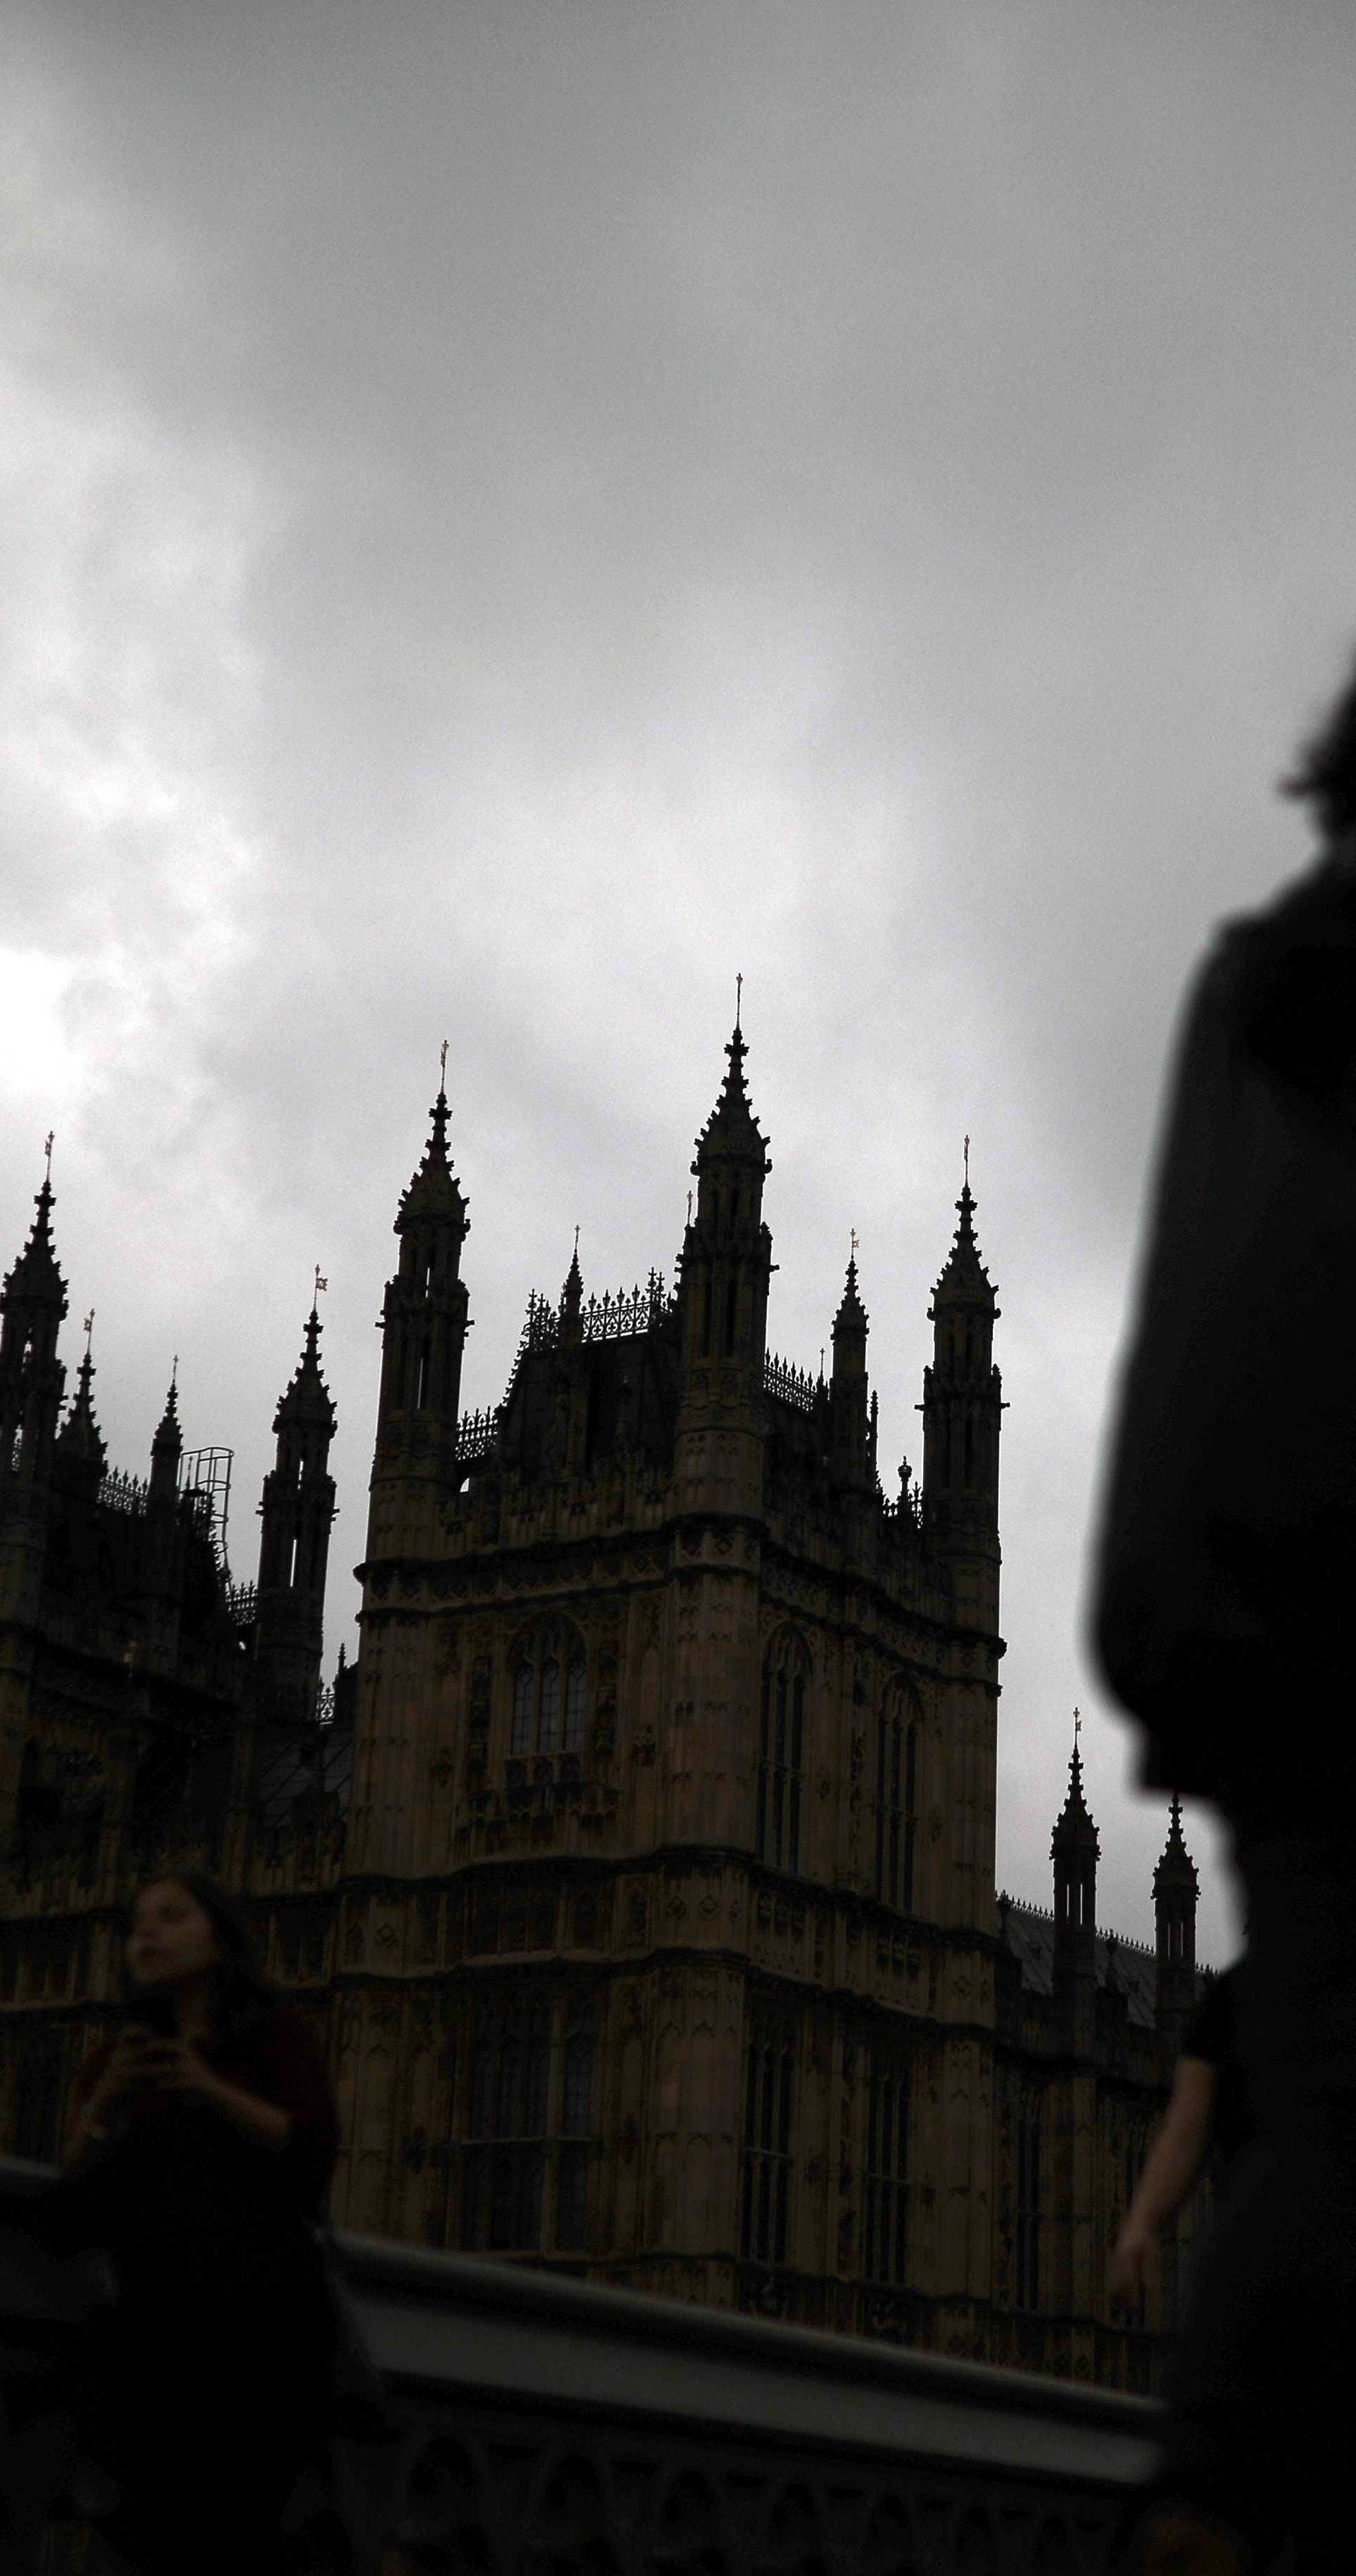 A woman walks past the Houses of Parliament and the Big Ben clock tower, on the day of the EU referendum, in central London